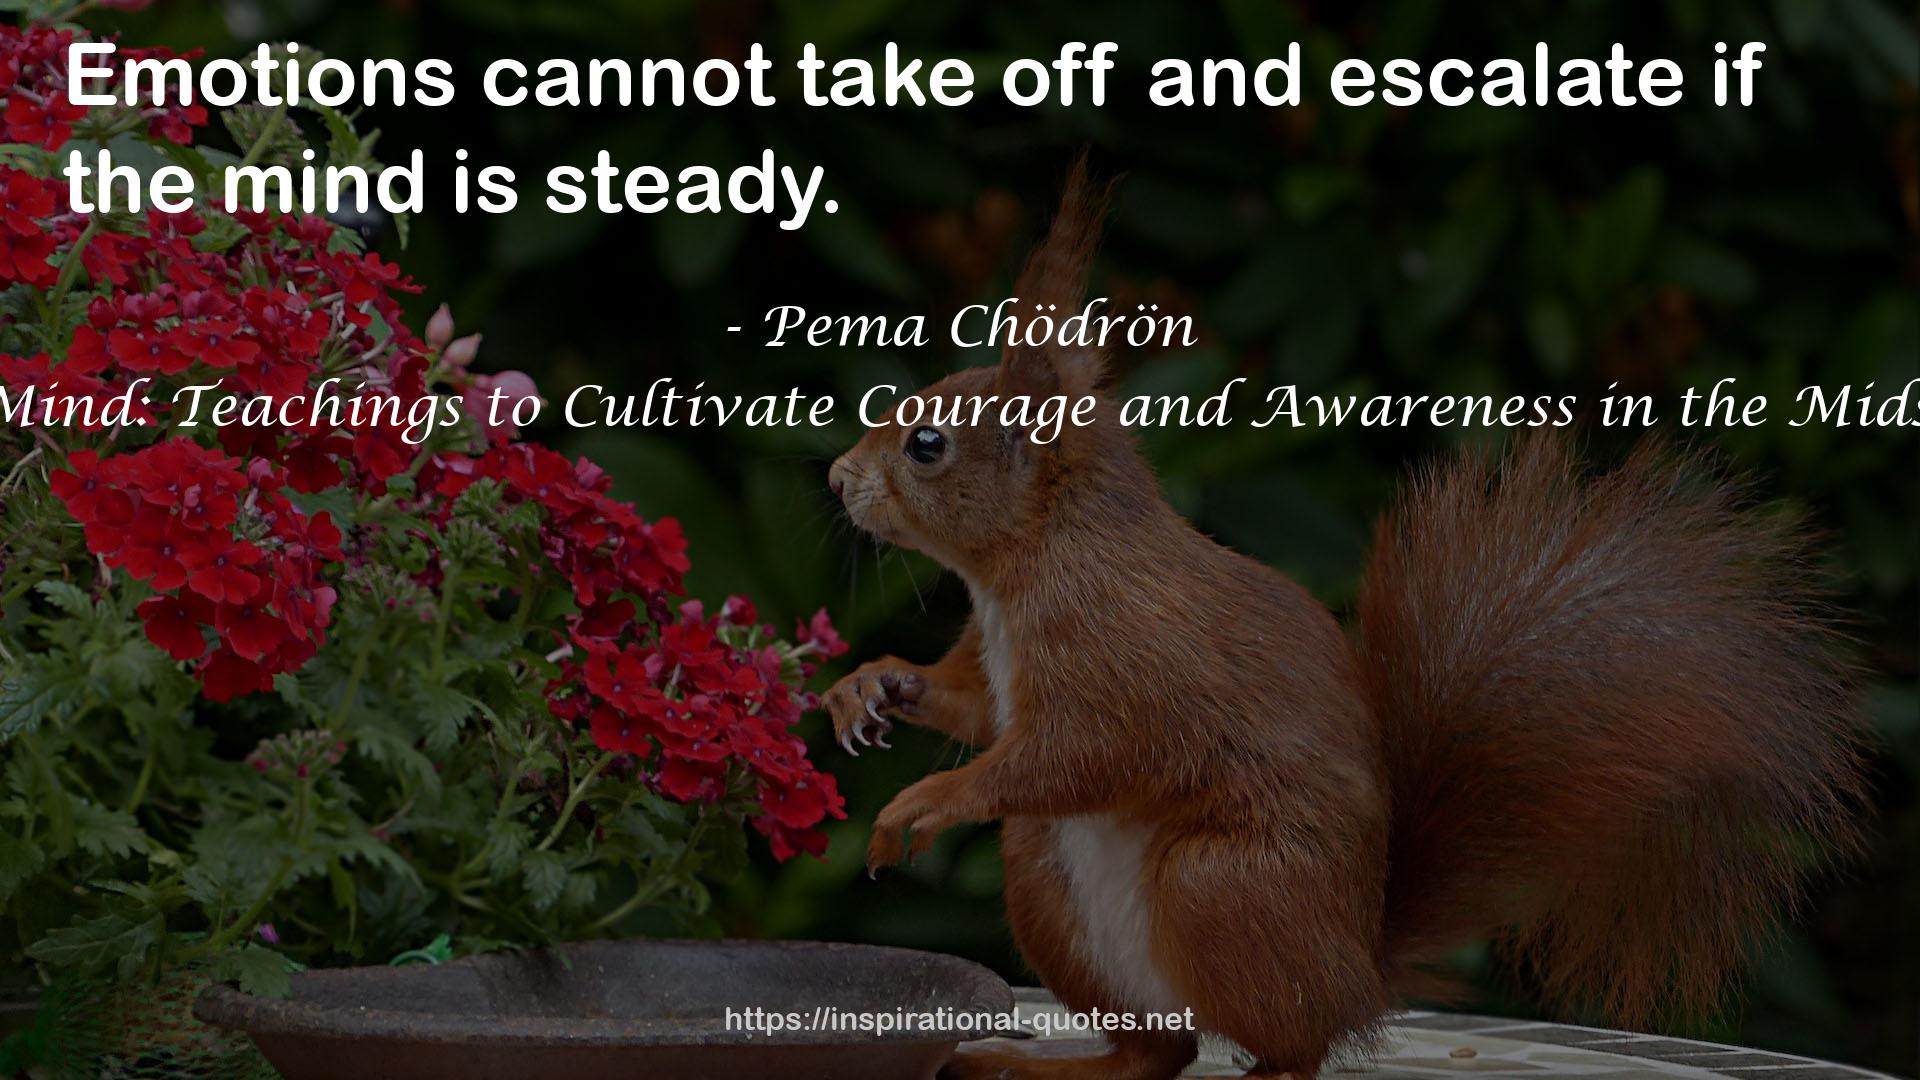 Bodhisattva Mind: Teachings to Cultivate Courage and Awareness in the Midst of Suffering QUOTES